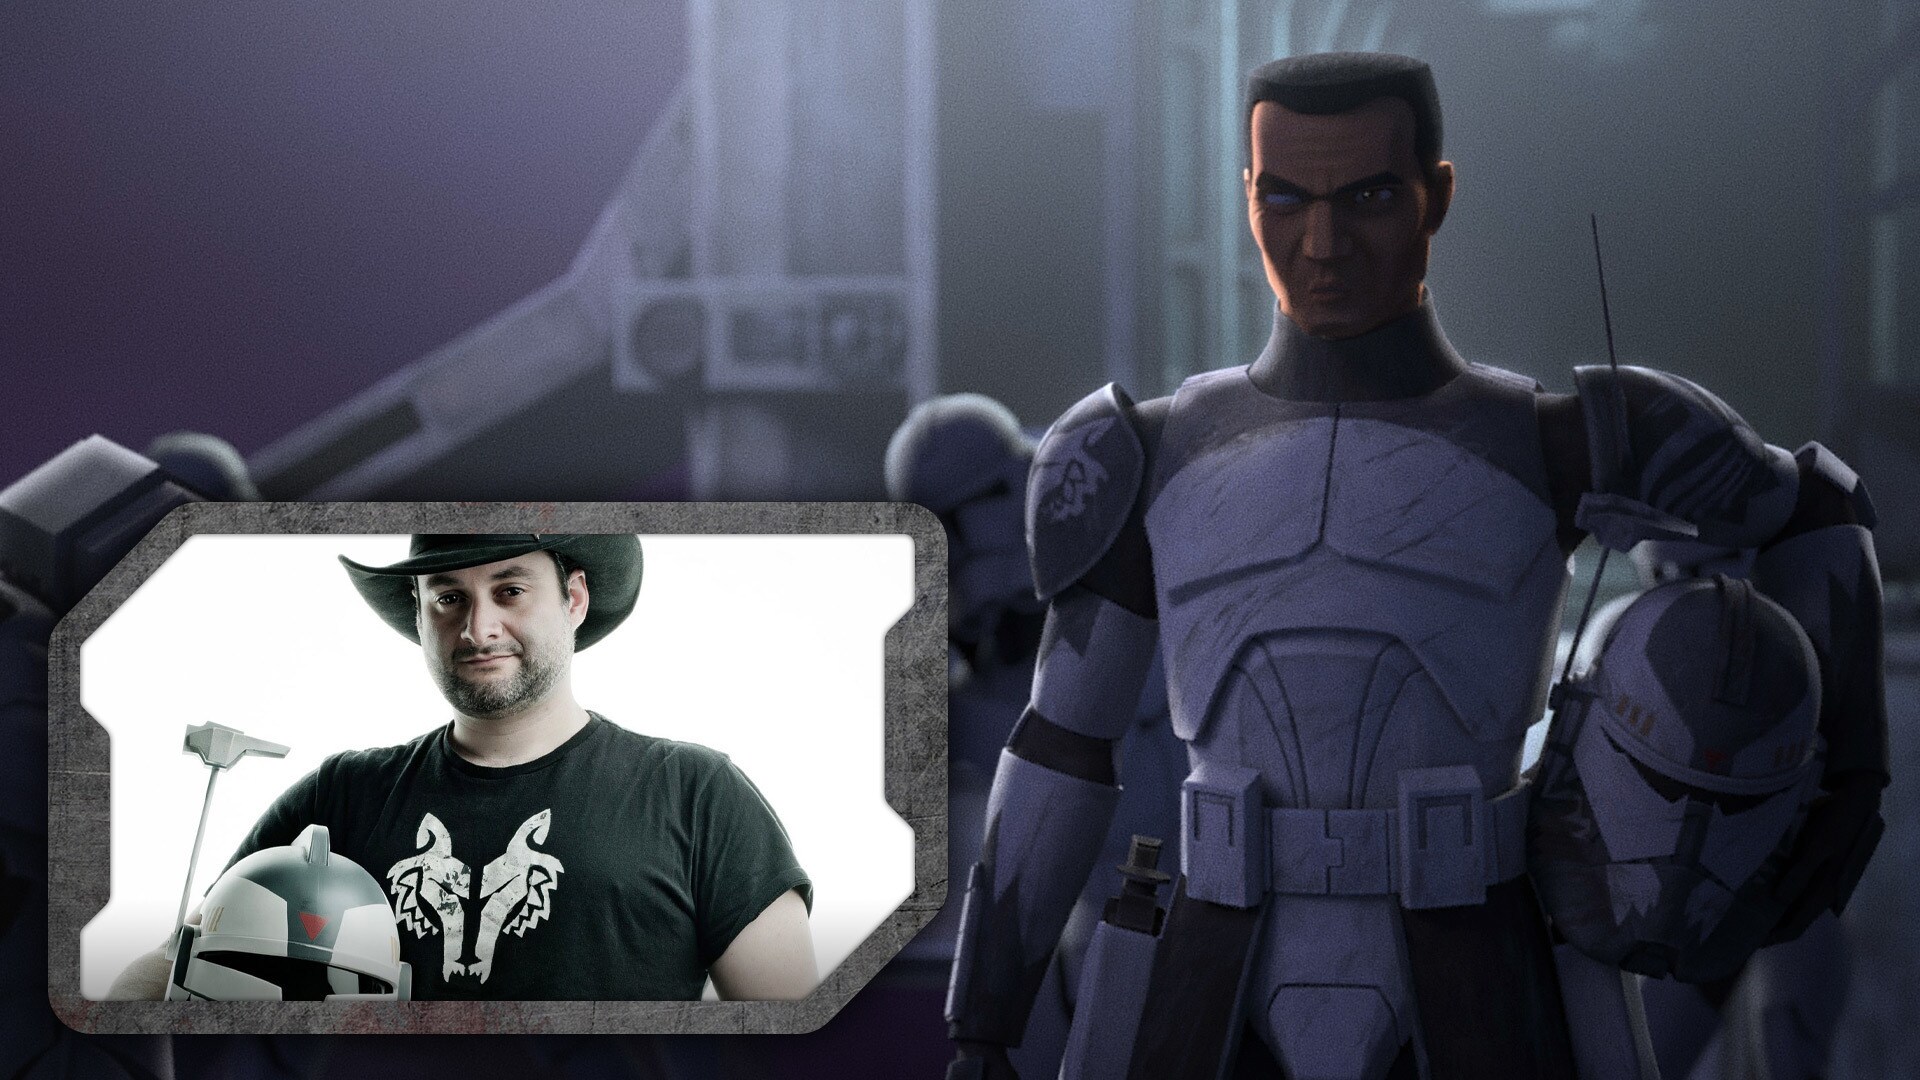 Wolffe has a stylized image of a wolf painted on his shoulder — a nod to Star Wars: The Clone Wars supervising director (and now Lucasfilm CCO) Dave Filoni’s favorite animal.